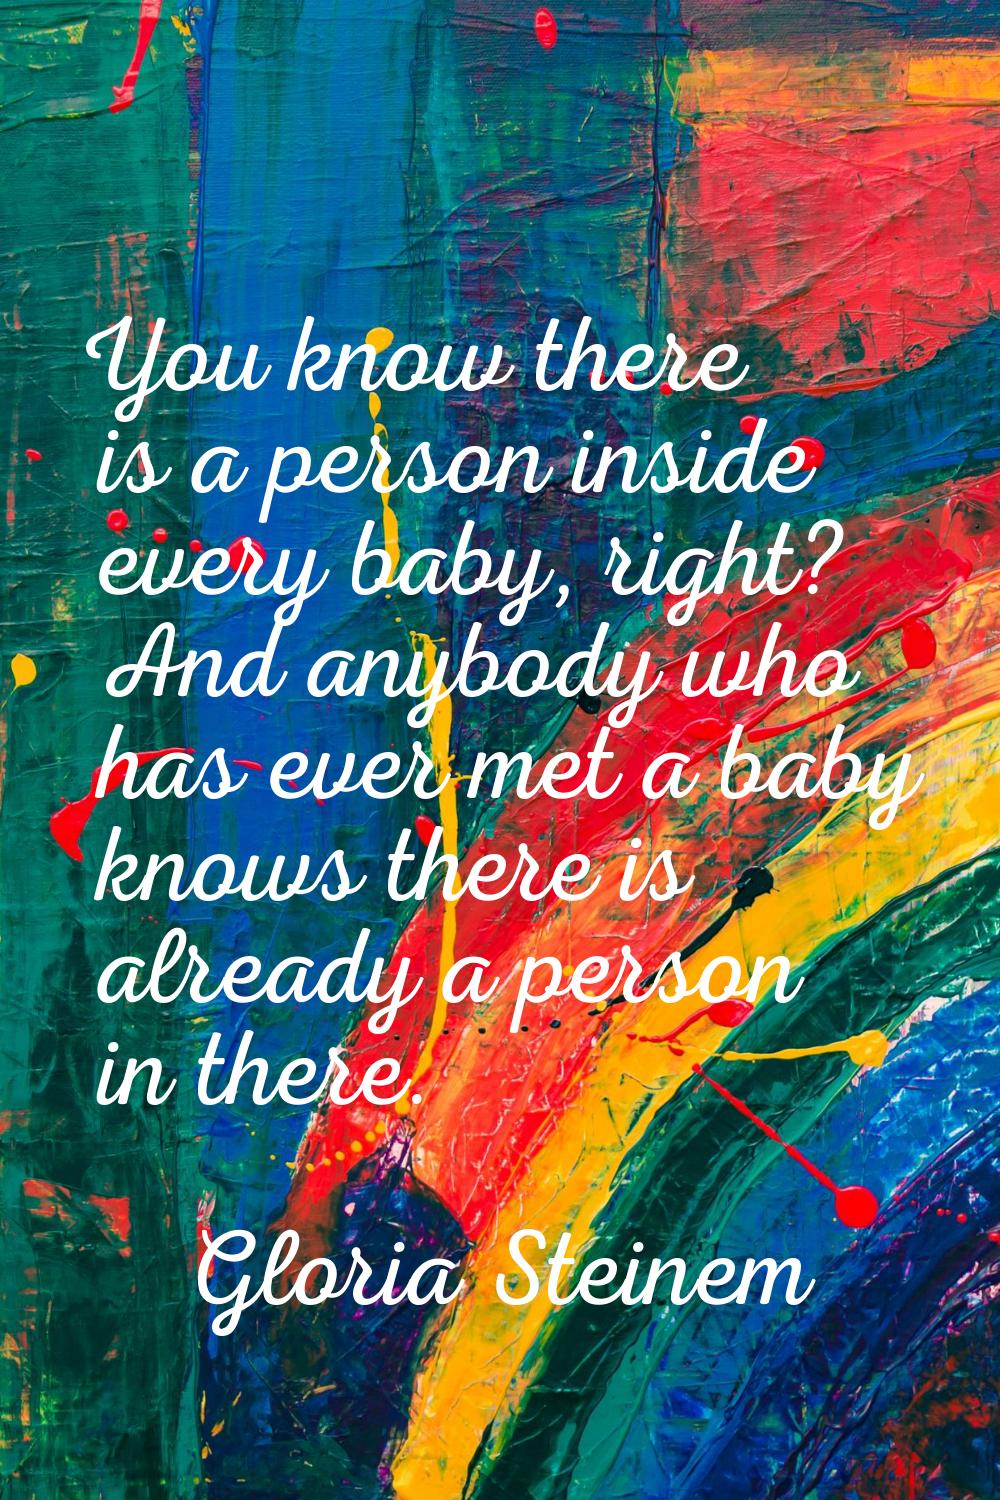 You know there is a person inside every baby, right? And anybody who has ever met a baby knows ther